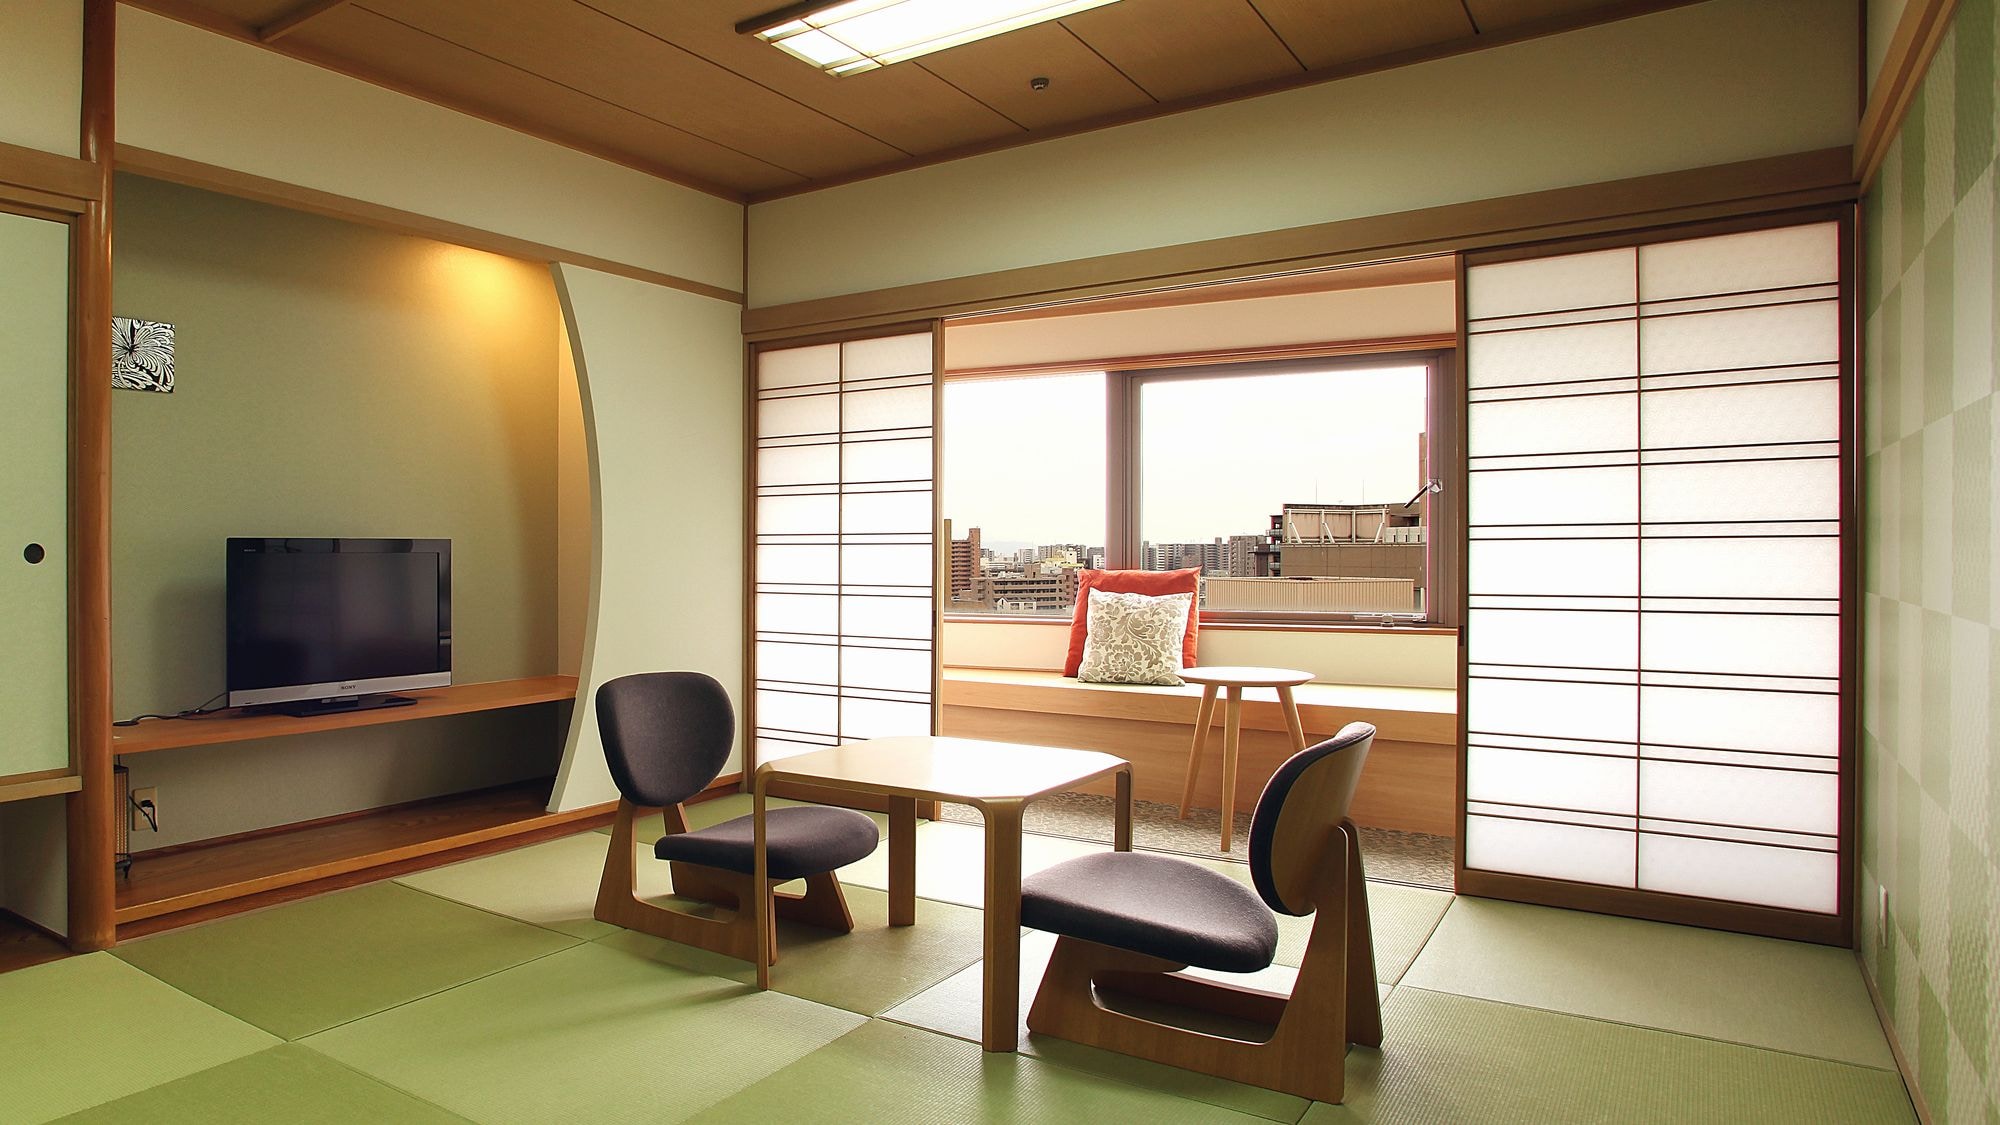 ◆ General guest room (Japanese-style room) There are a town side and a mountain side, and the image is the town side.